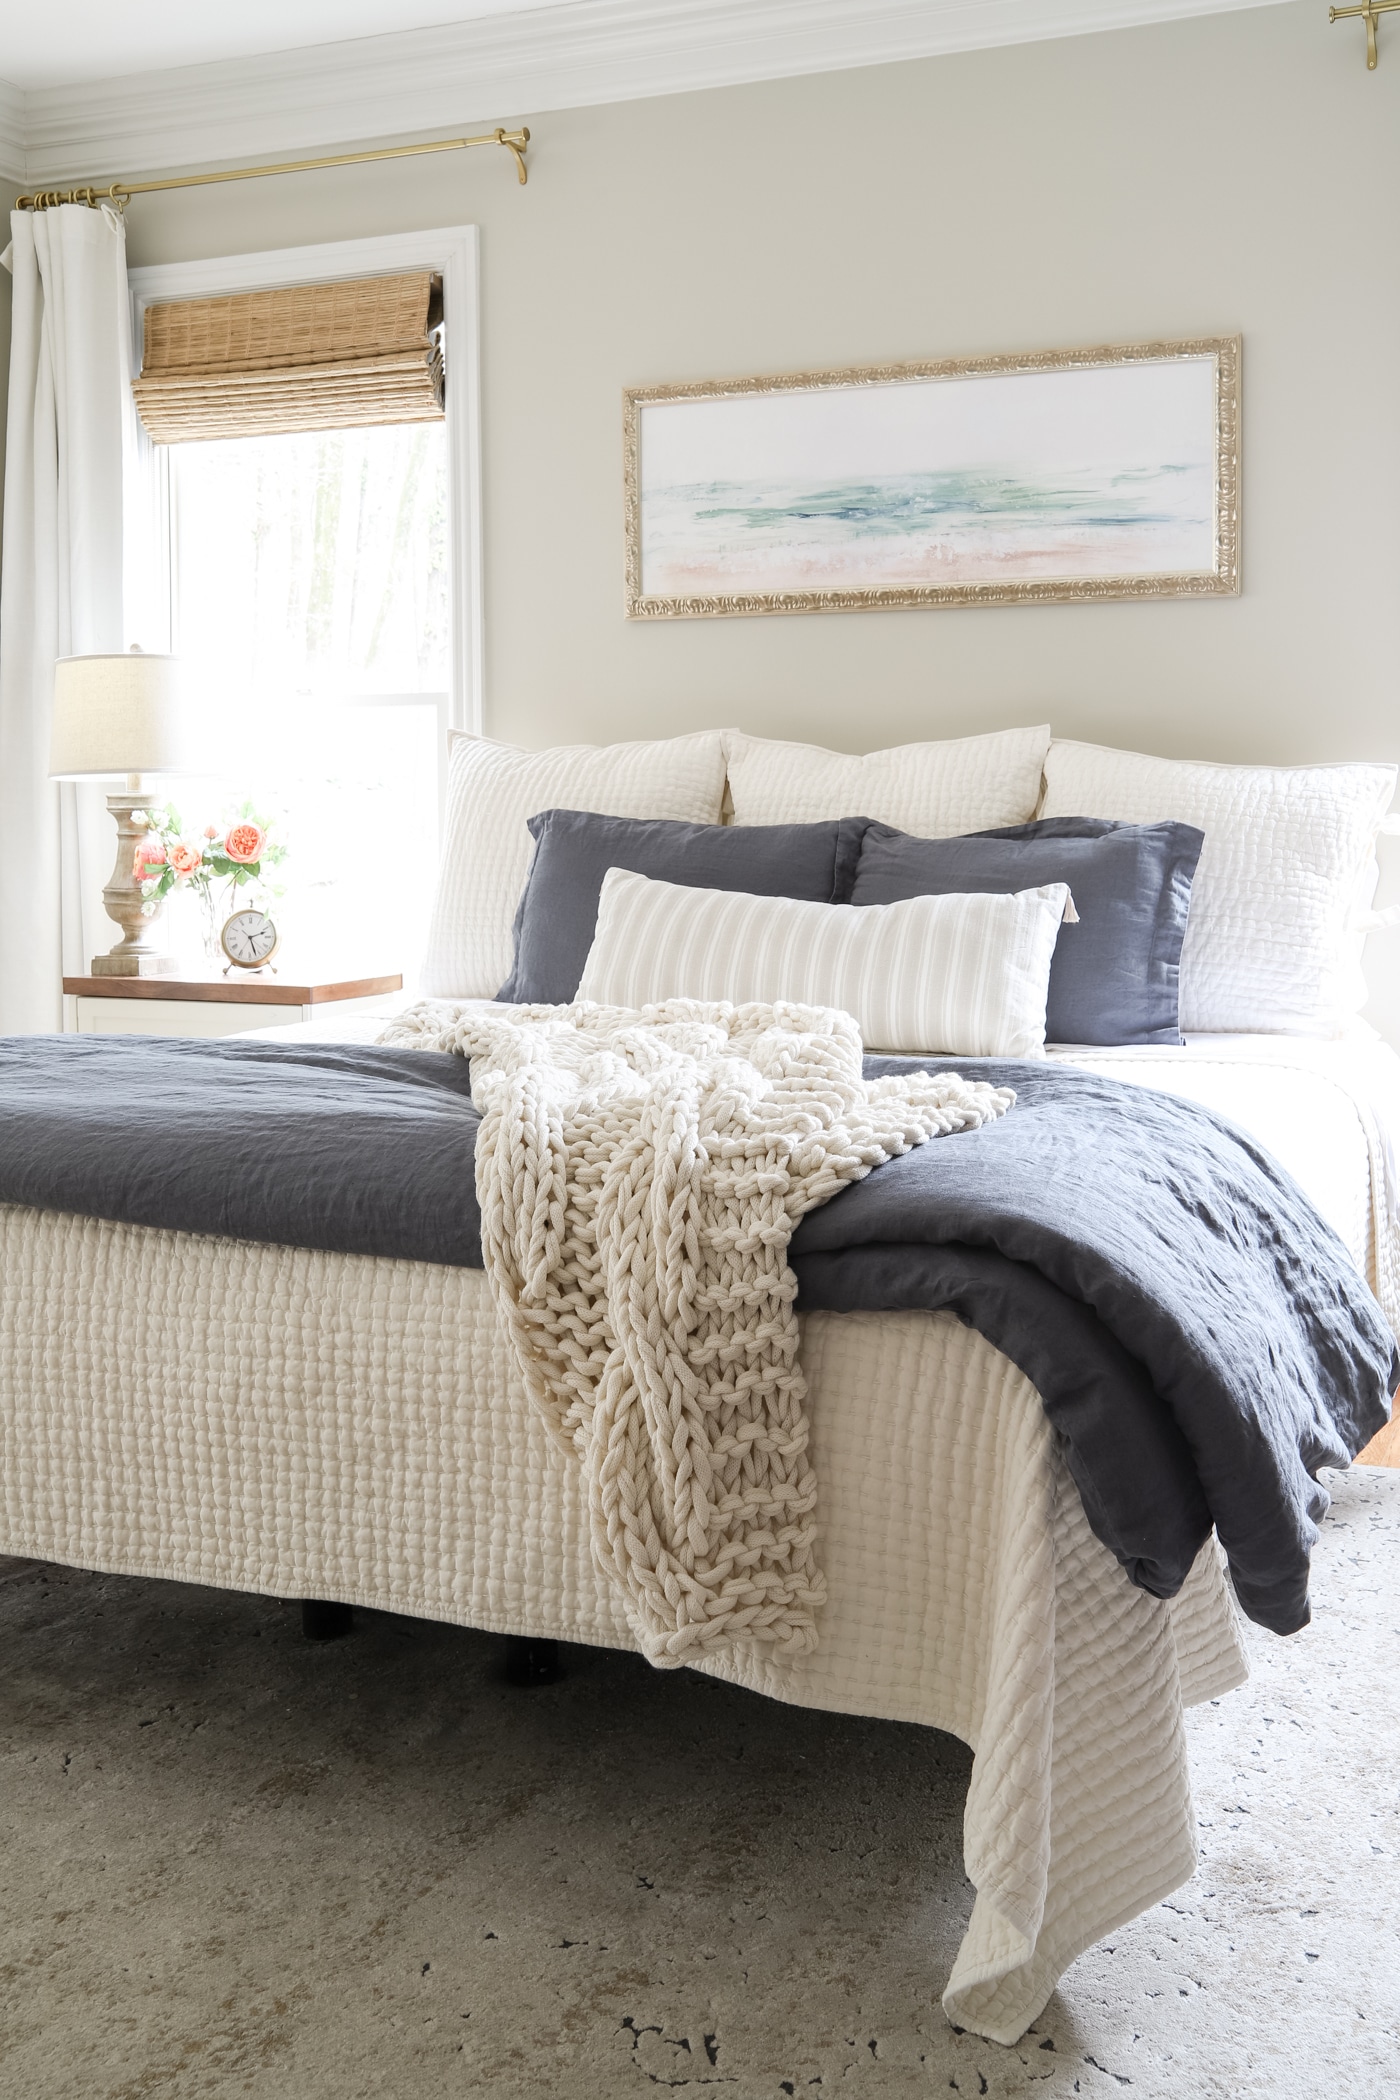 How to Layer Bedding Like a Pro!